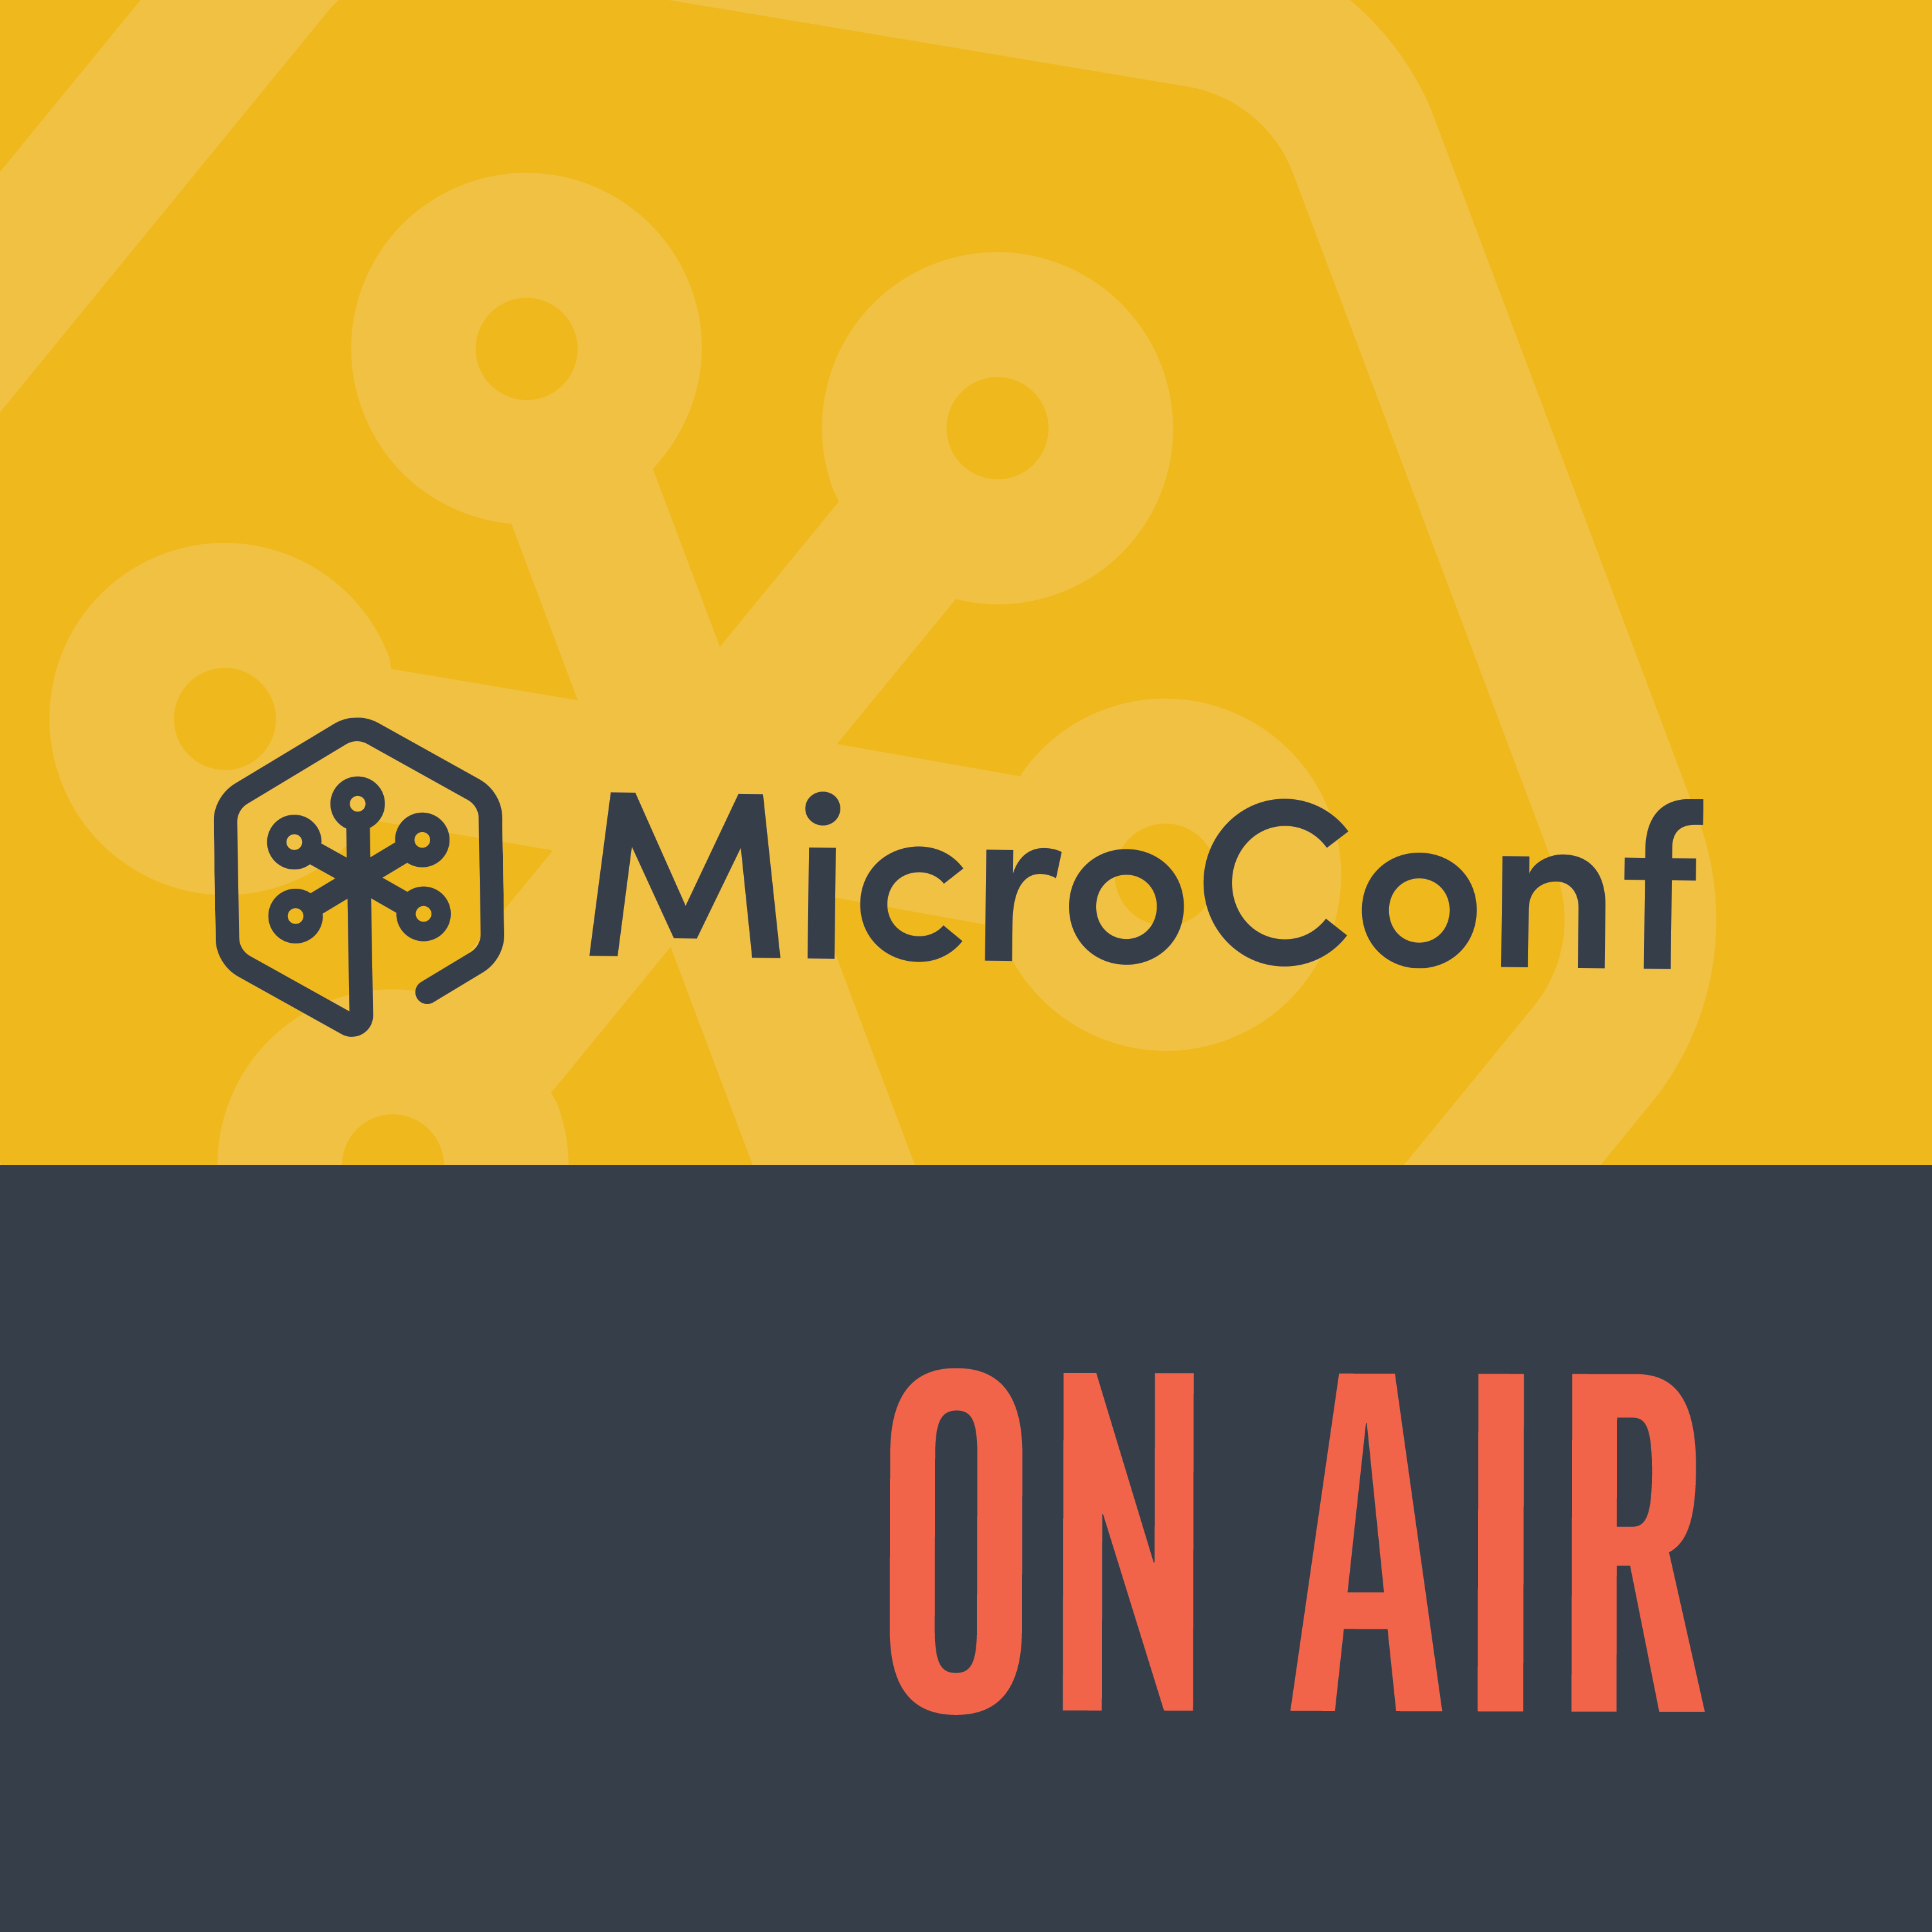 MicroConf Refresh Episode 61: Level Up Your Company with Community with Anna Maste